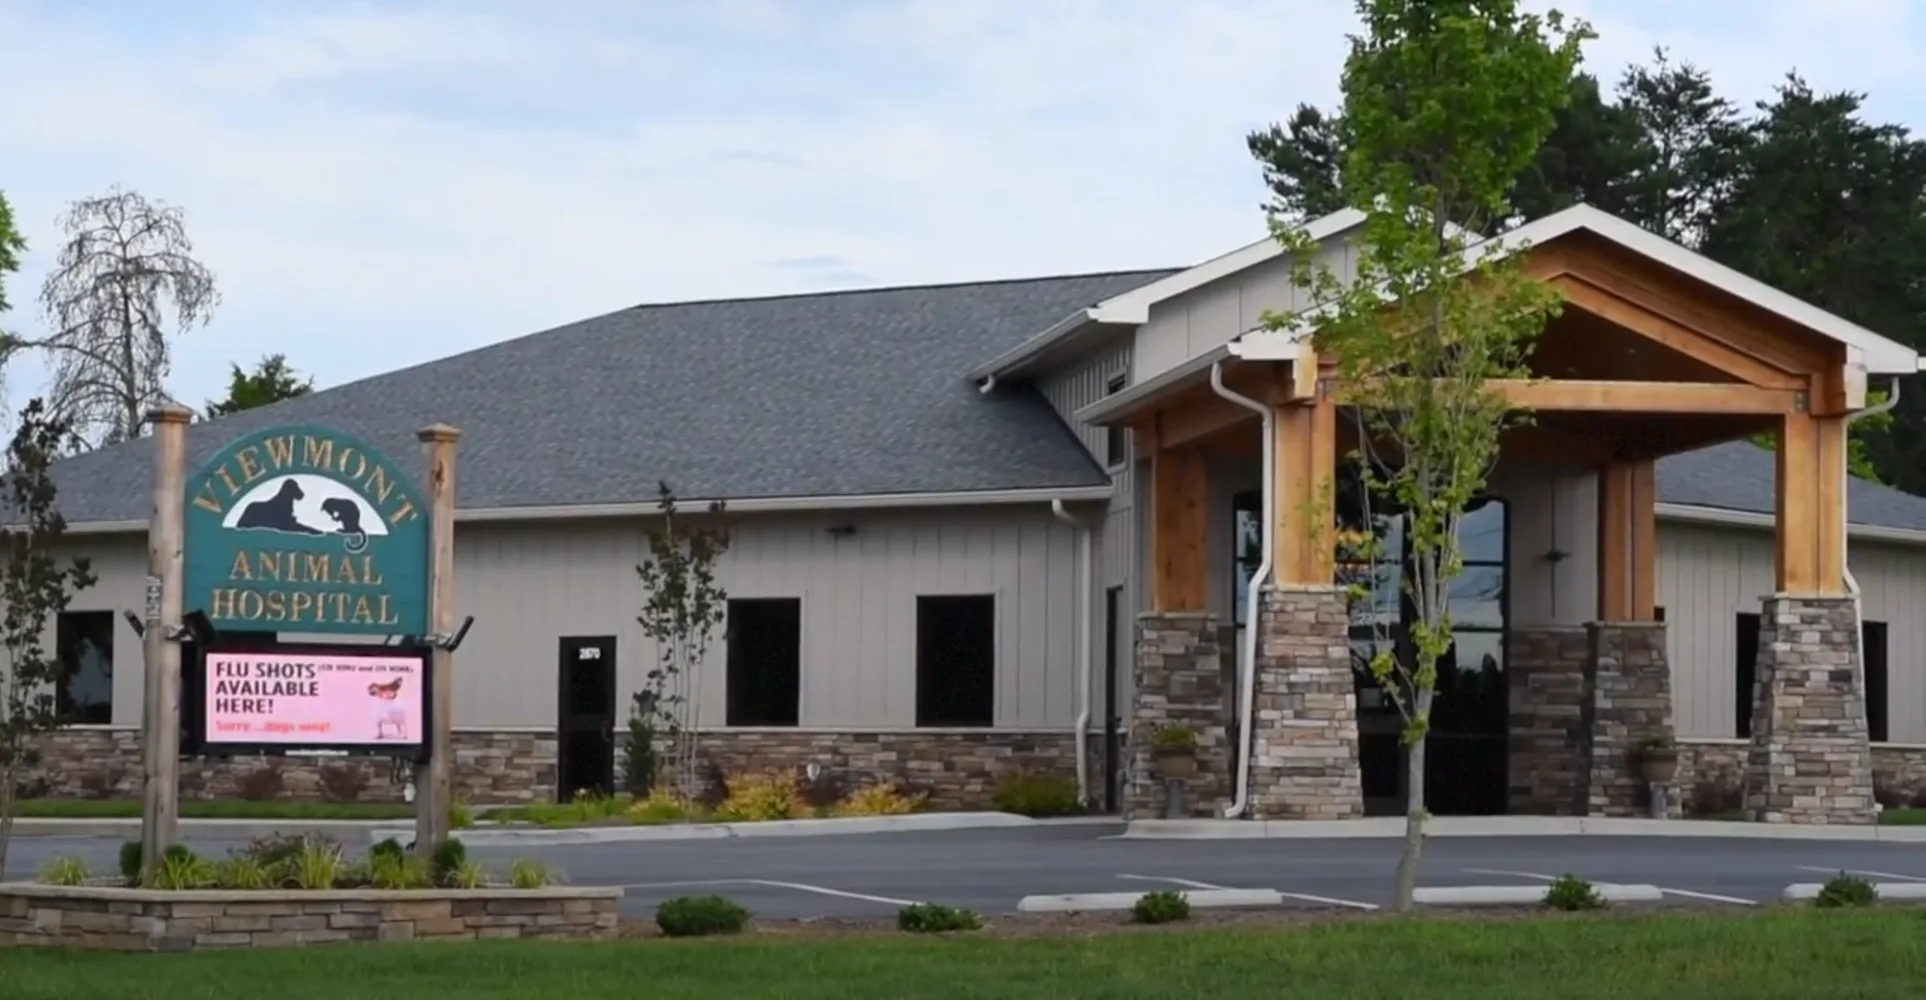 Thumbnail for a video of Viewmont Animal Hospital showing the front of the facility